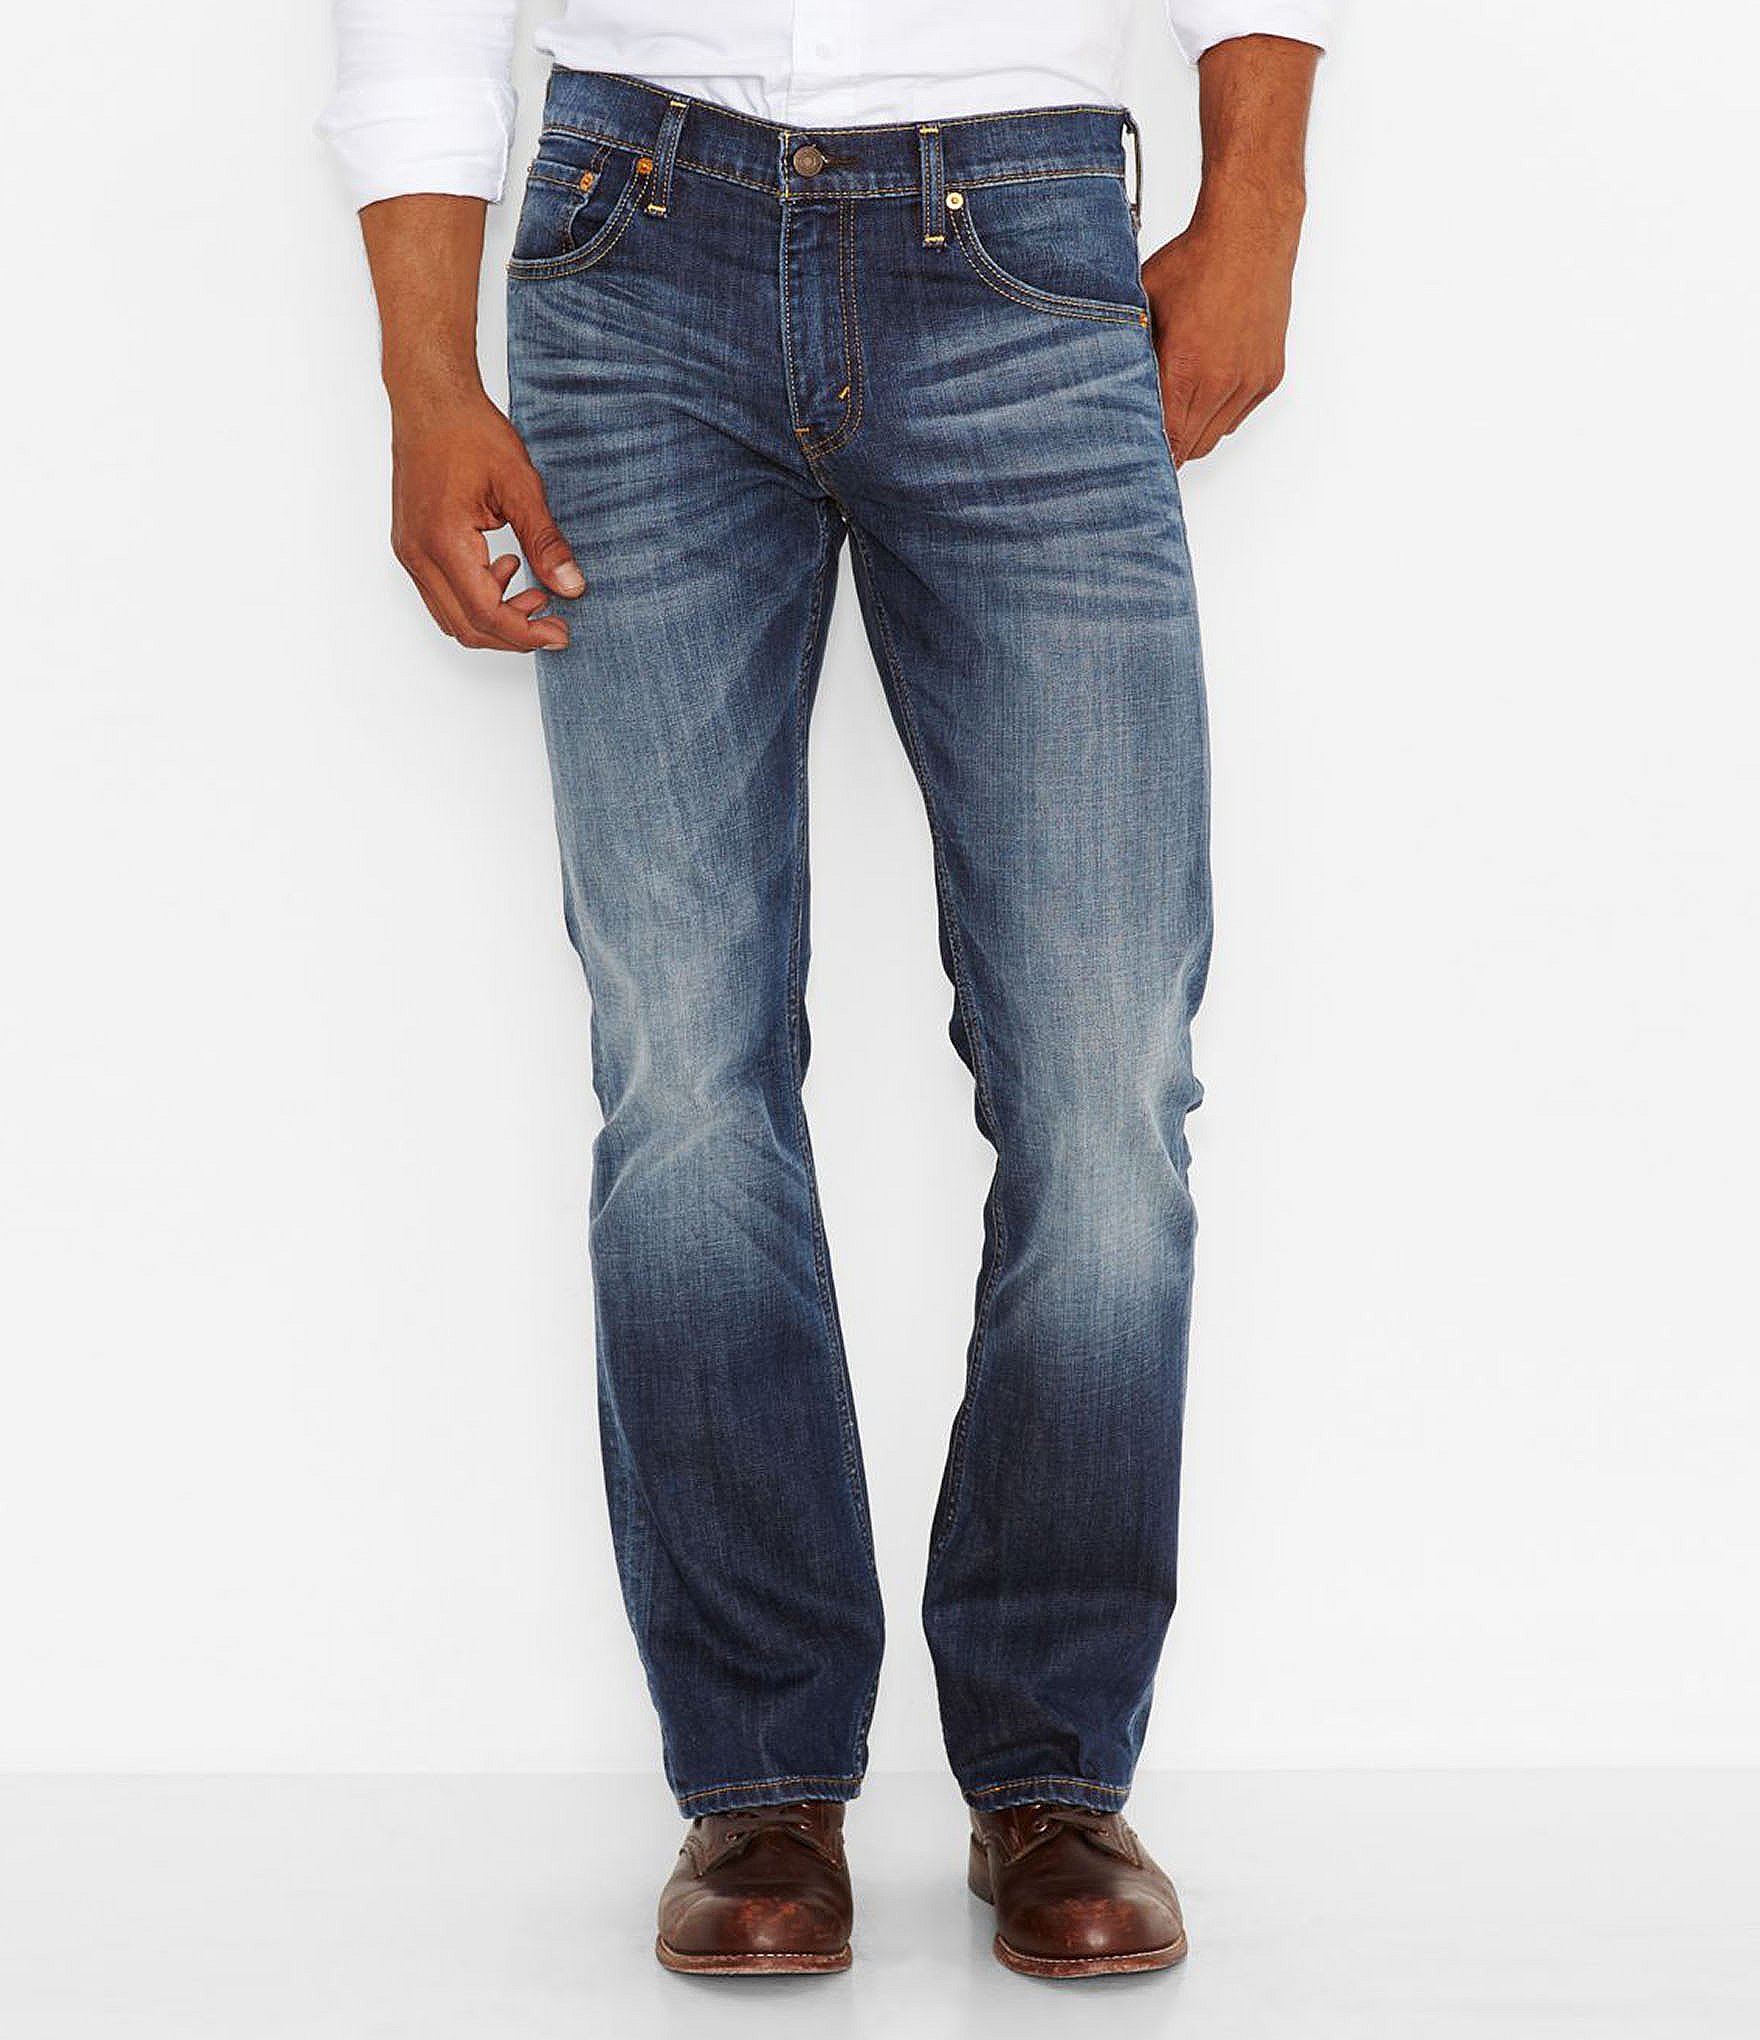 Mens Bootcut Jeans – Bootcuts in different versions